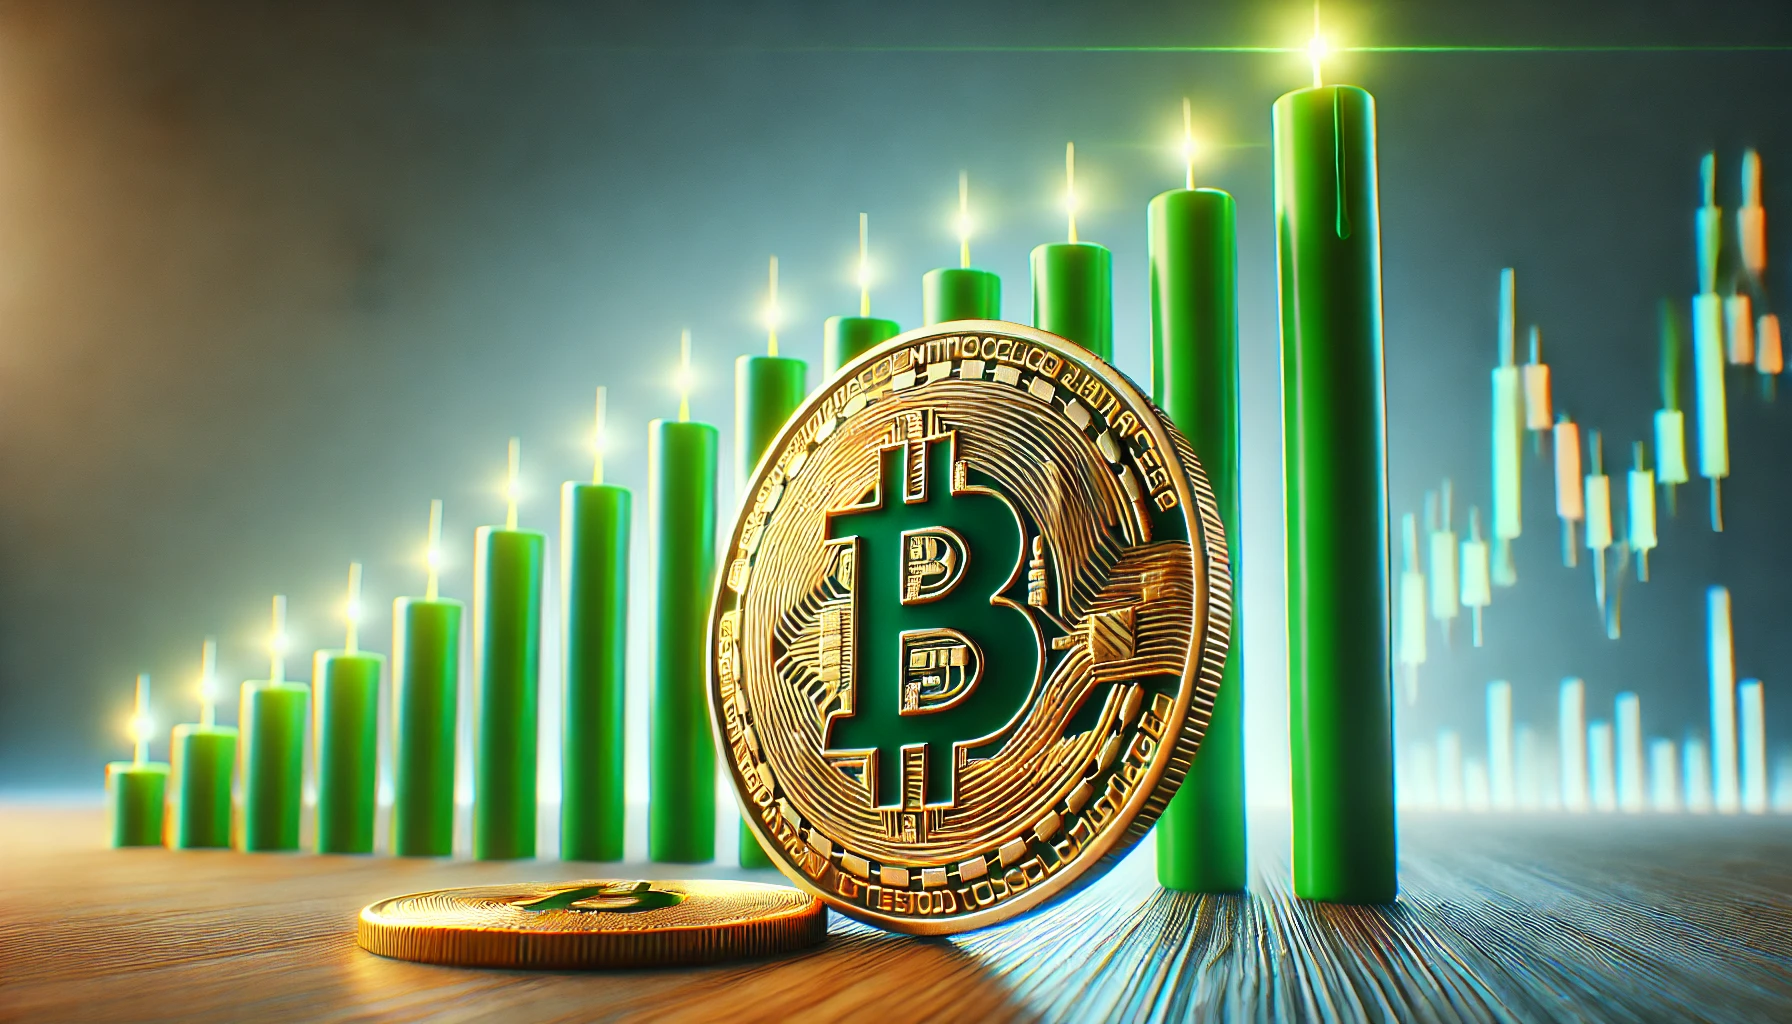 VanEck Predicts Bitcoin Price Could Hit $52.38 Million, Here’s When